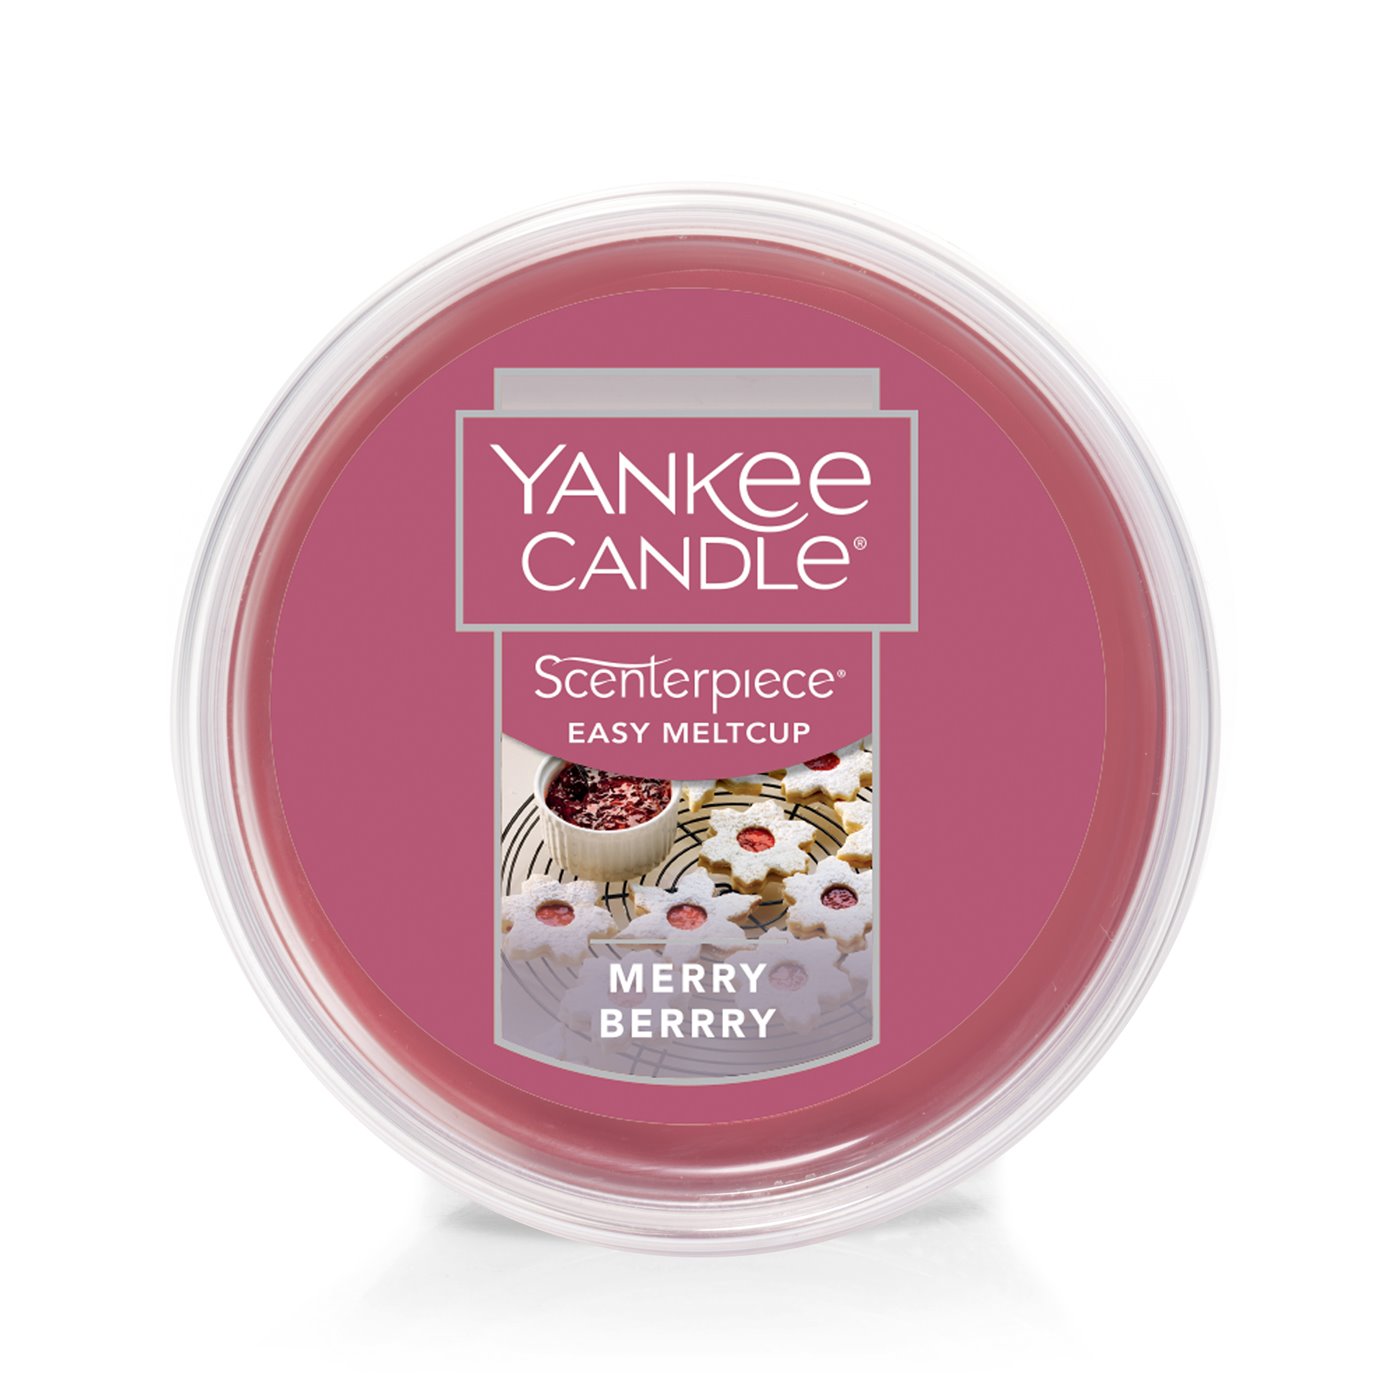 Yankee Candle Merry Berry Scenterpiece Easy MeltCup